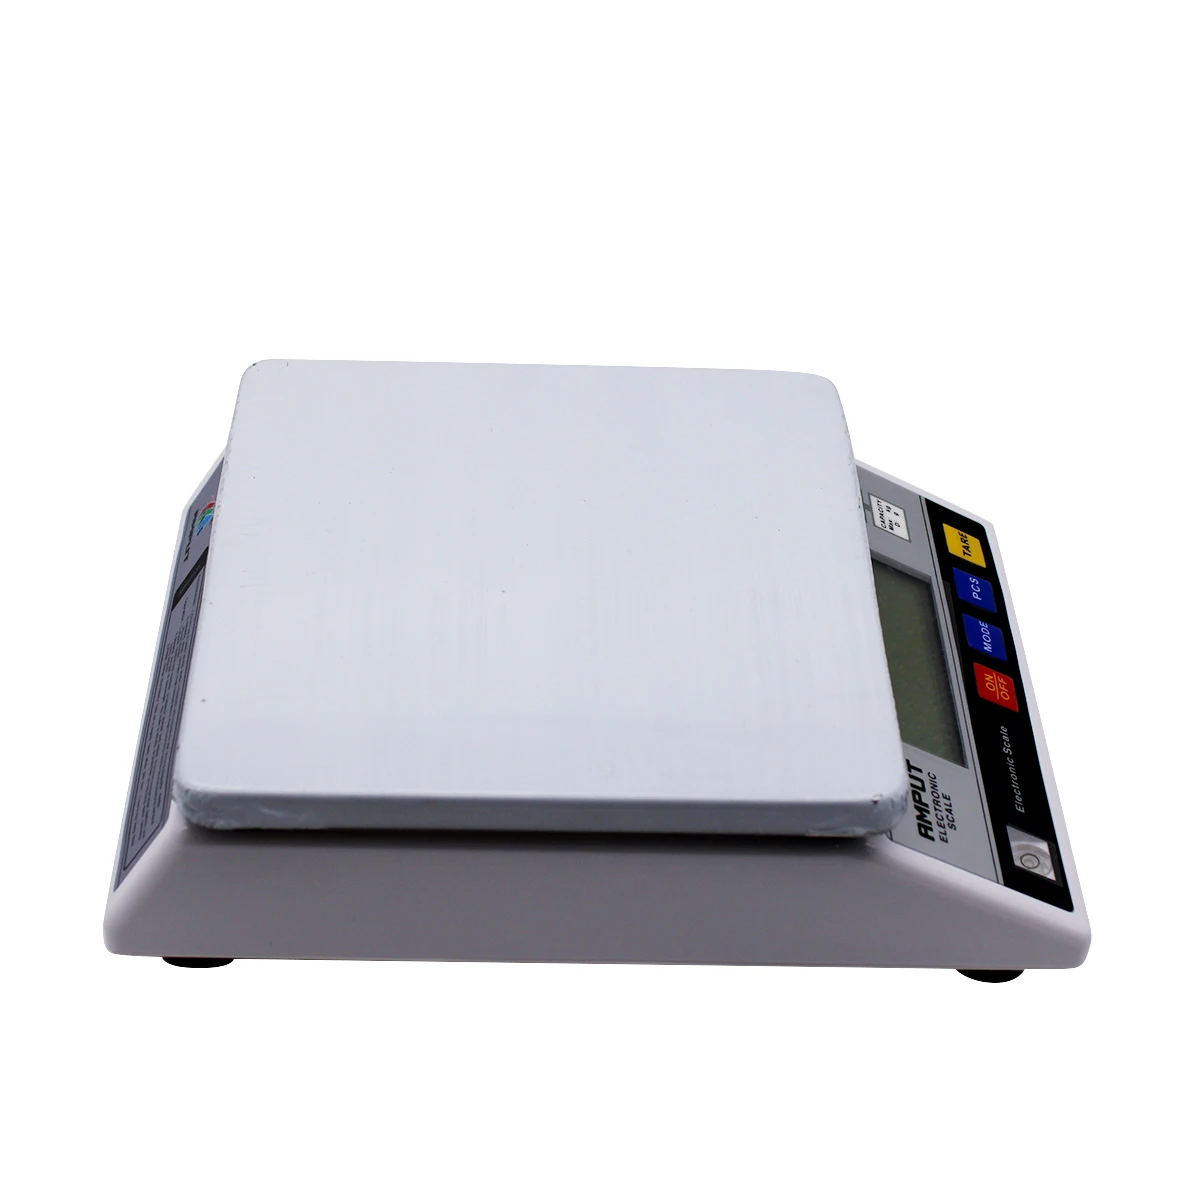 PRECISION DIGITAL SCALE 1g to 10kg weight KITCHEN ELECTRONIC ROCKER ABS LCD